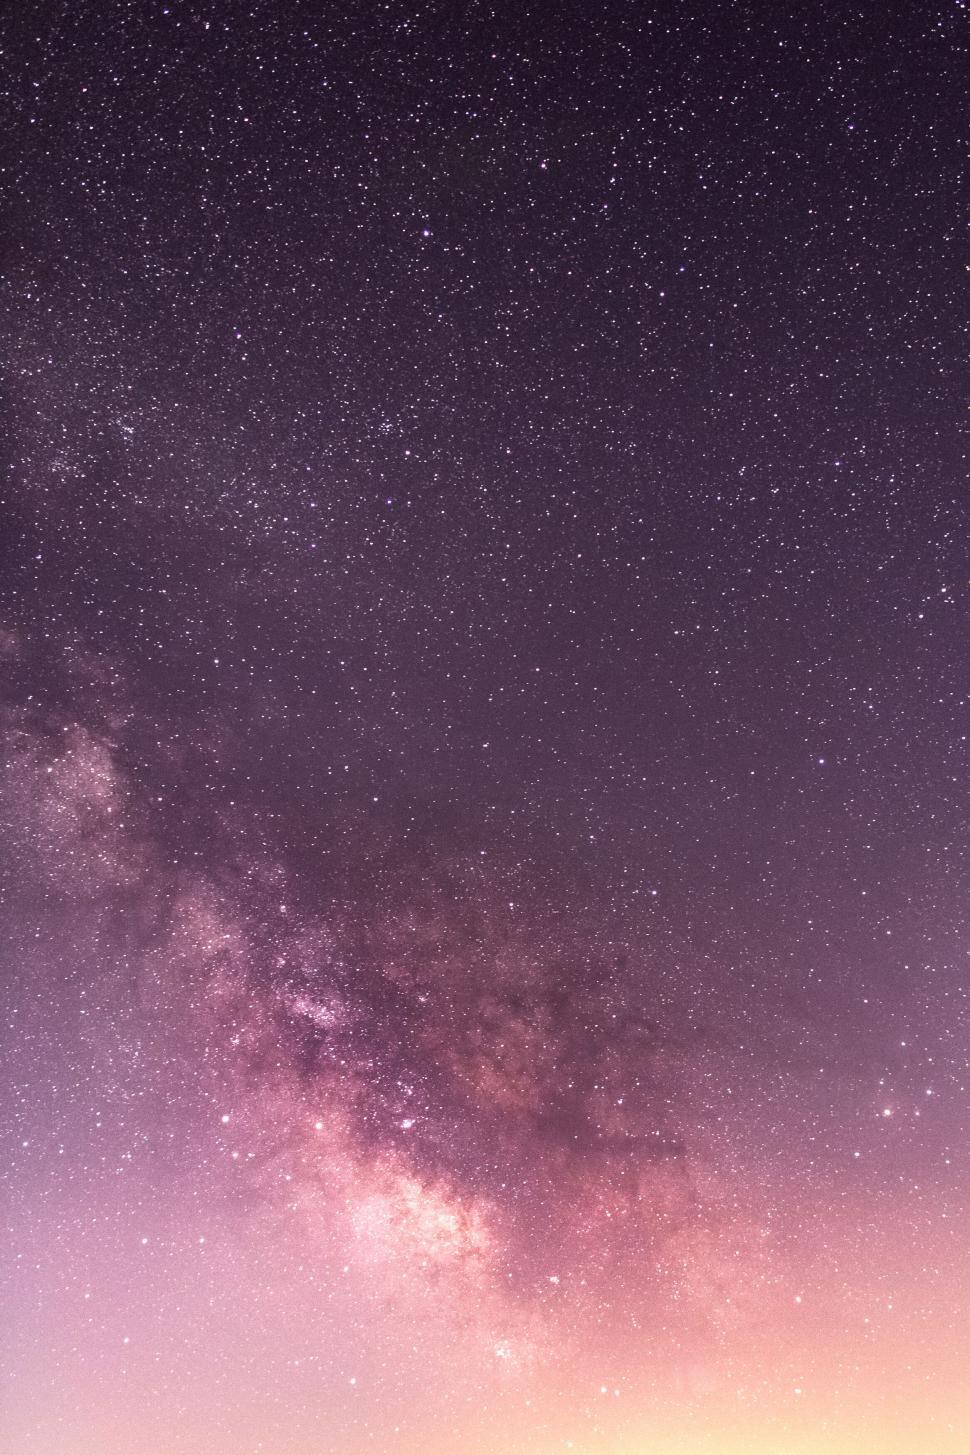 Free Image of Starry night sky with Milky Way galaxy 